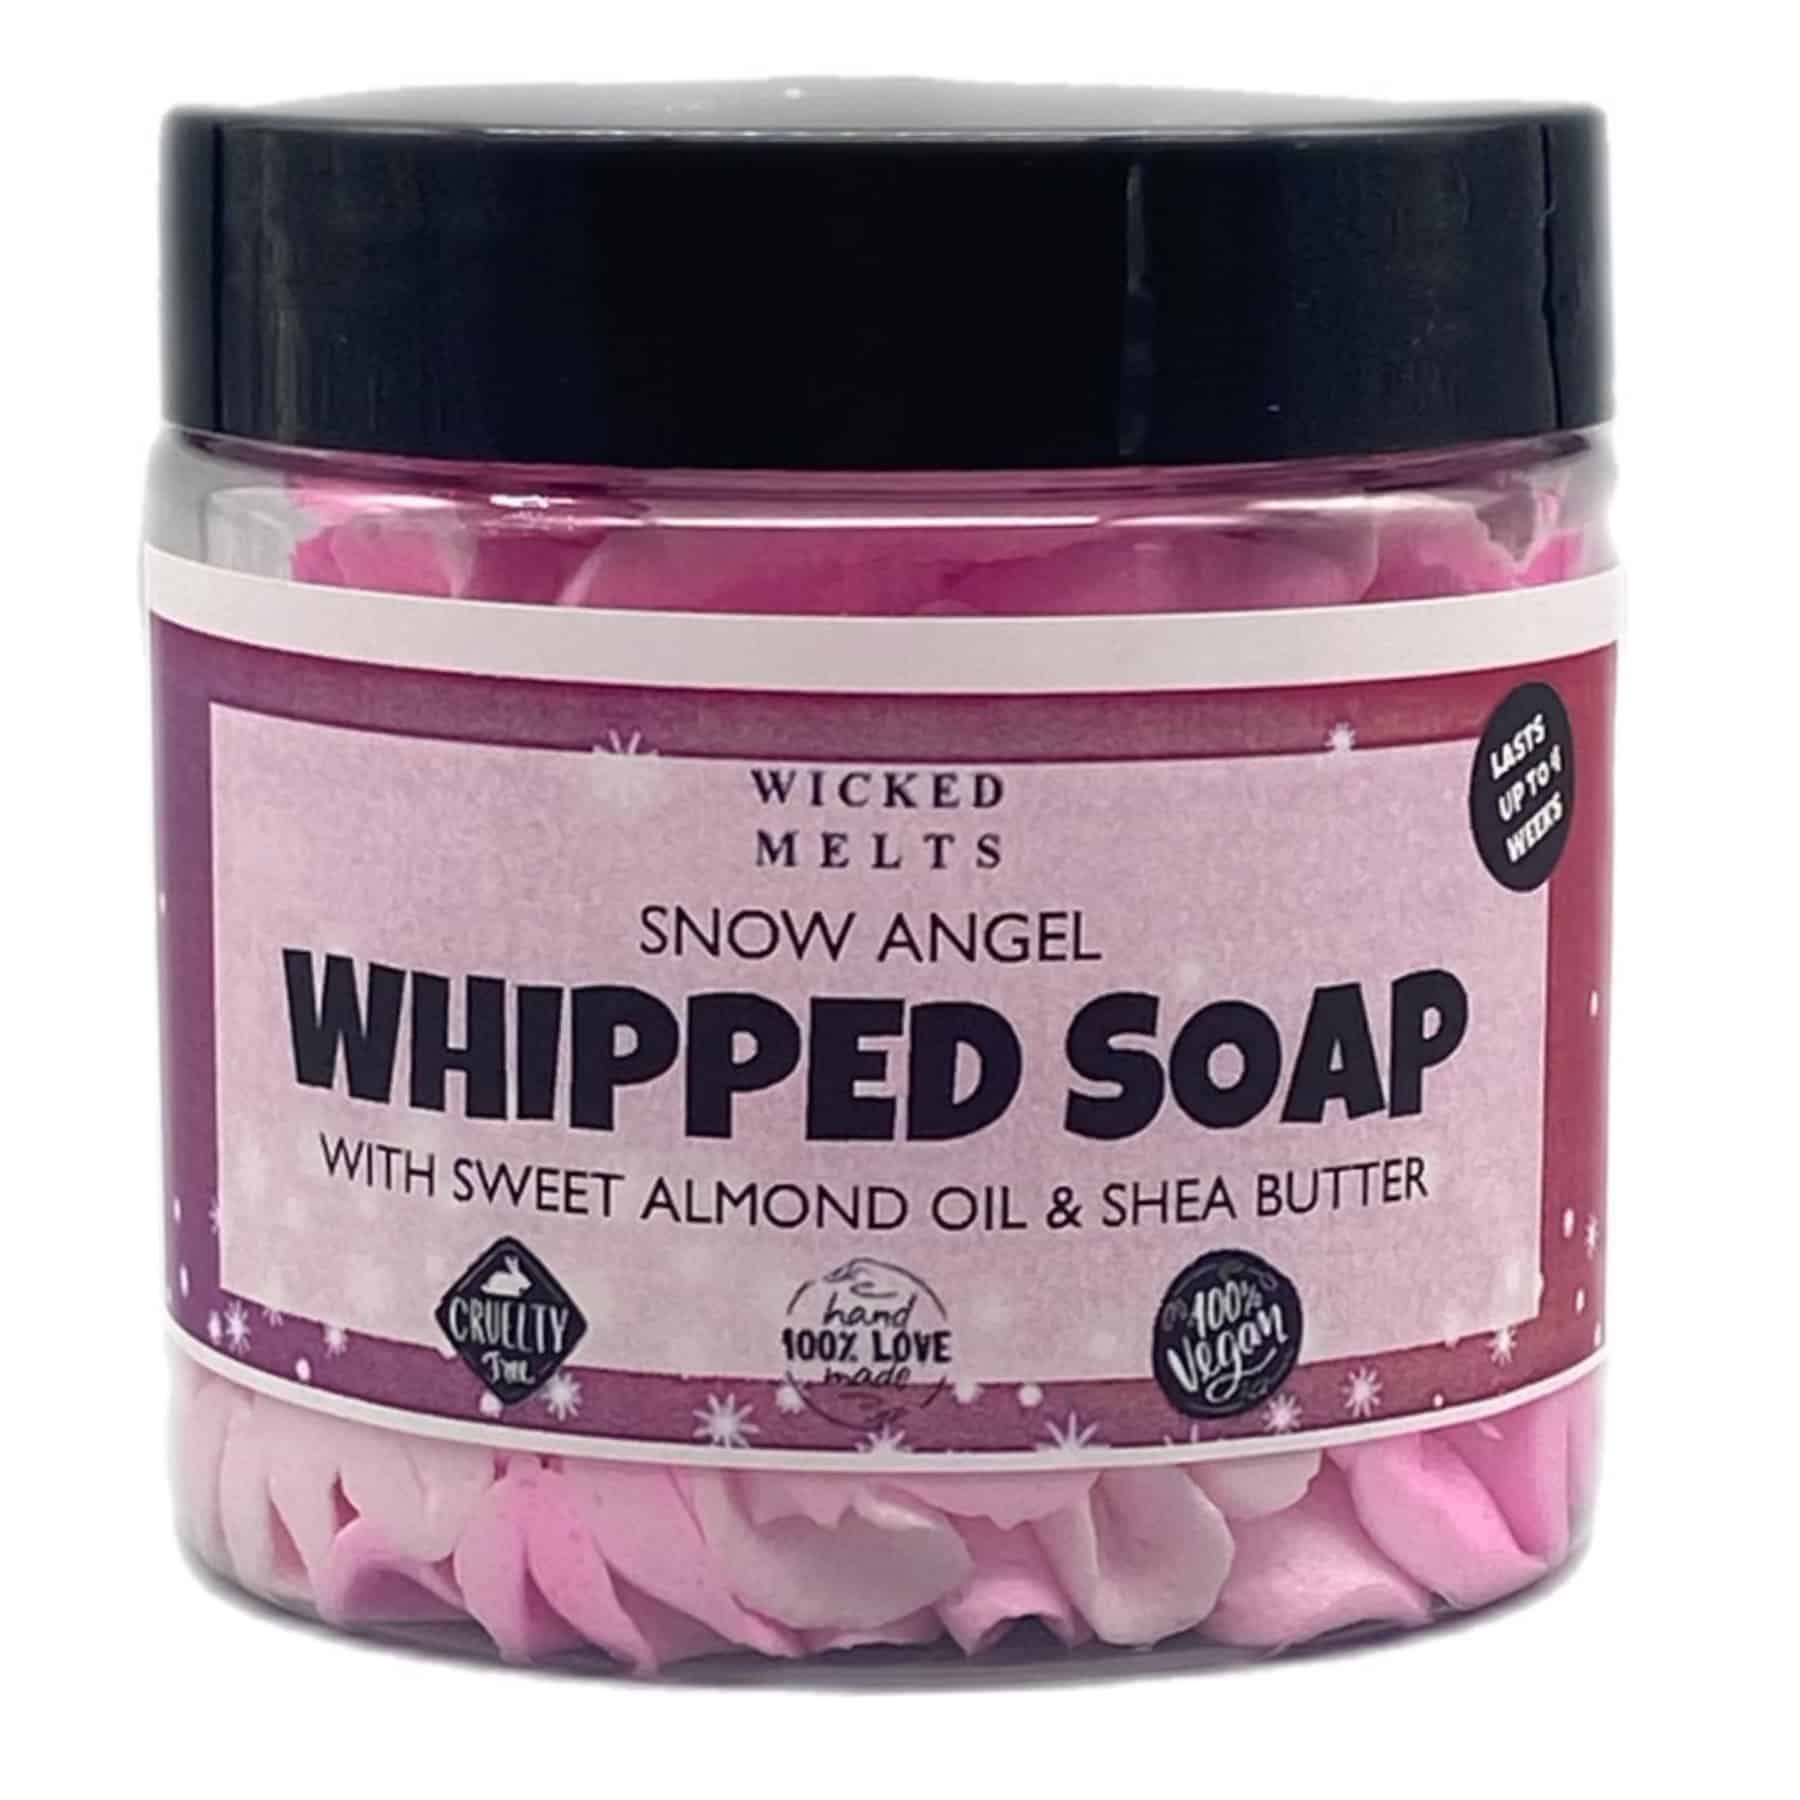 Snow Angel Whipped Soap - main product image